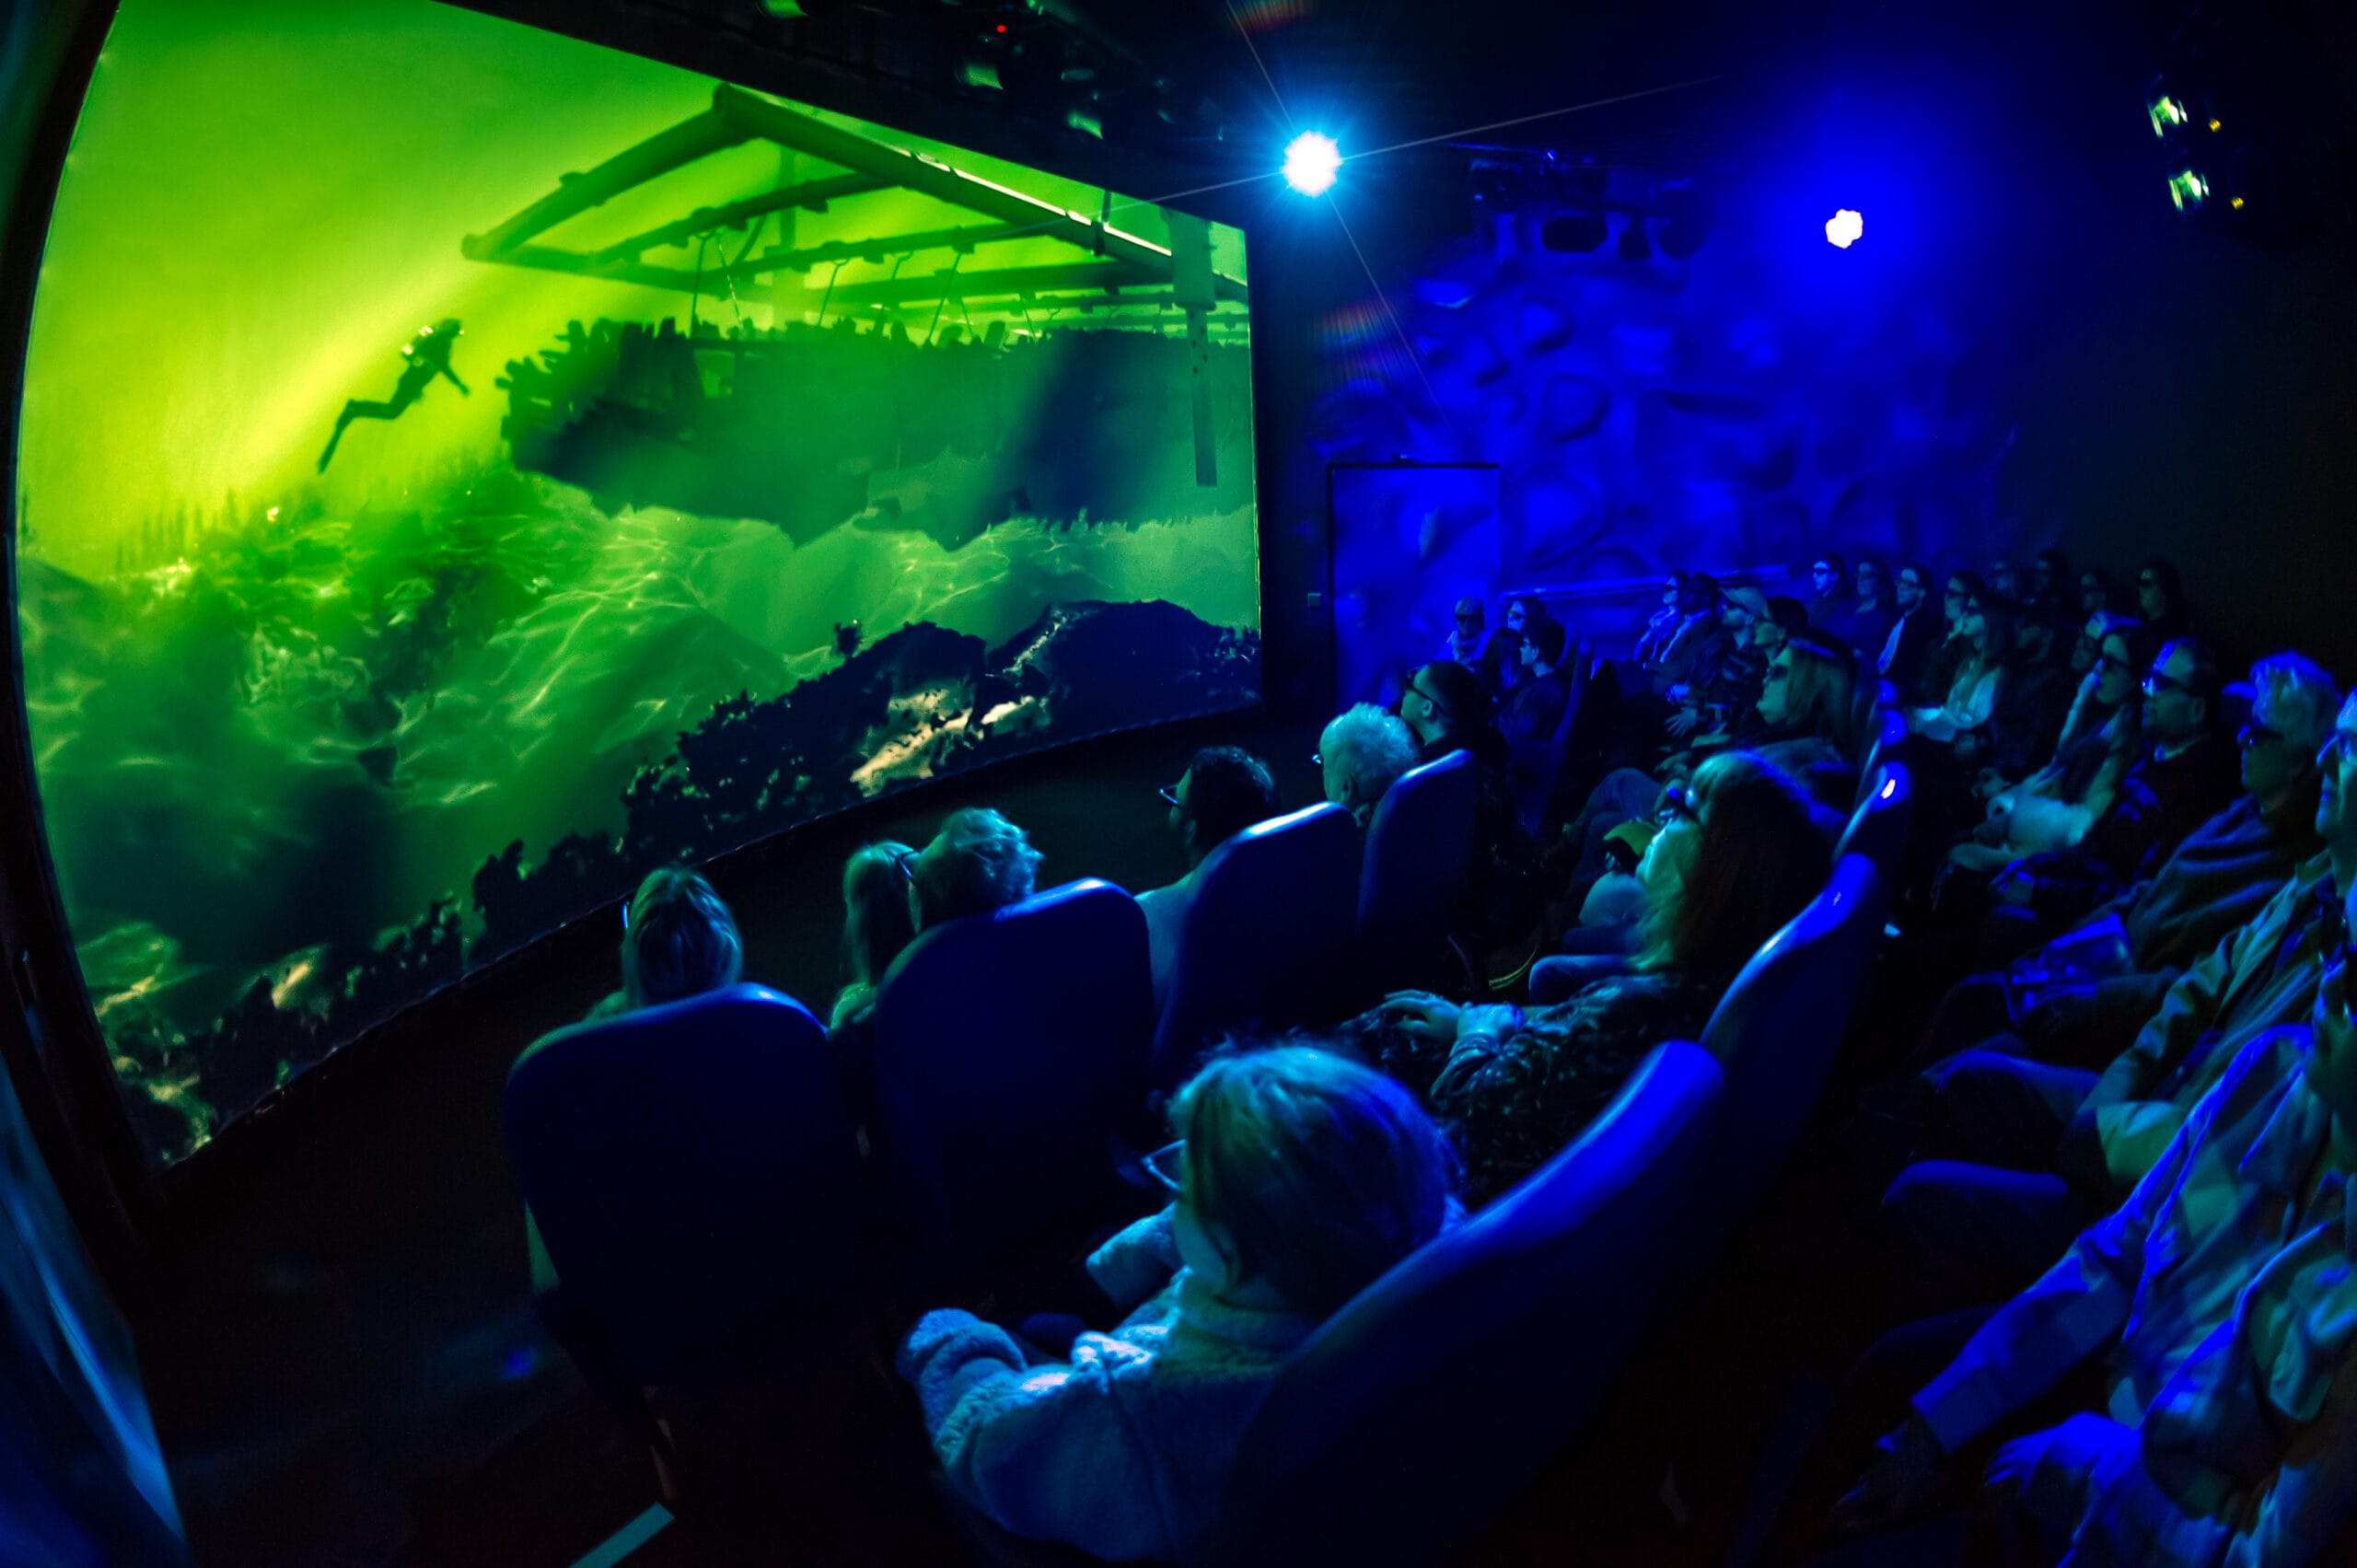 Dive The Mary Rose 4D: The new immersive cinema experience